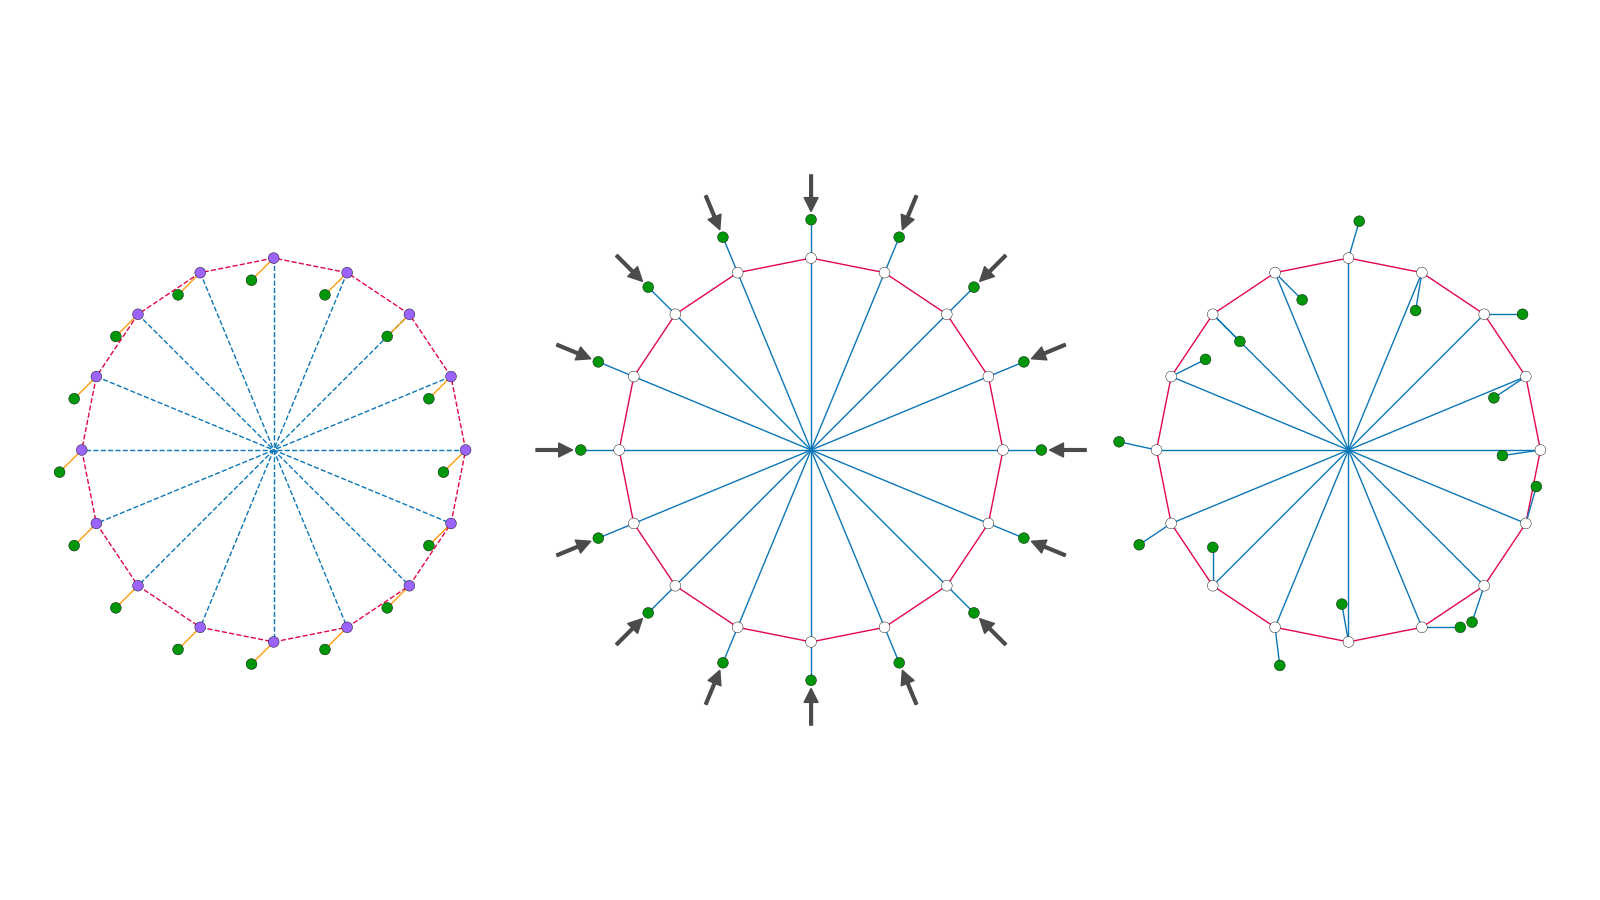 ../../_images/05_tensegrity_wheel_2d.png